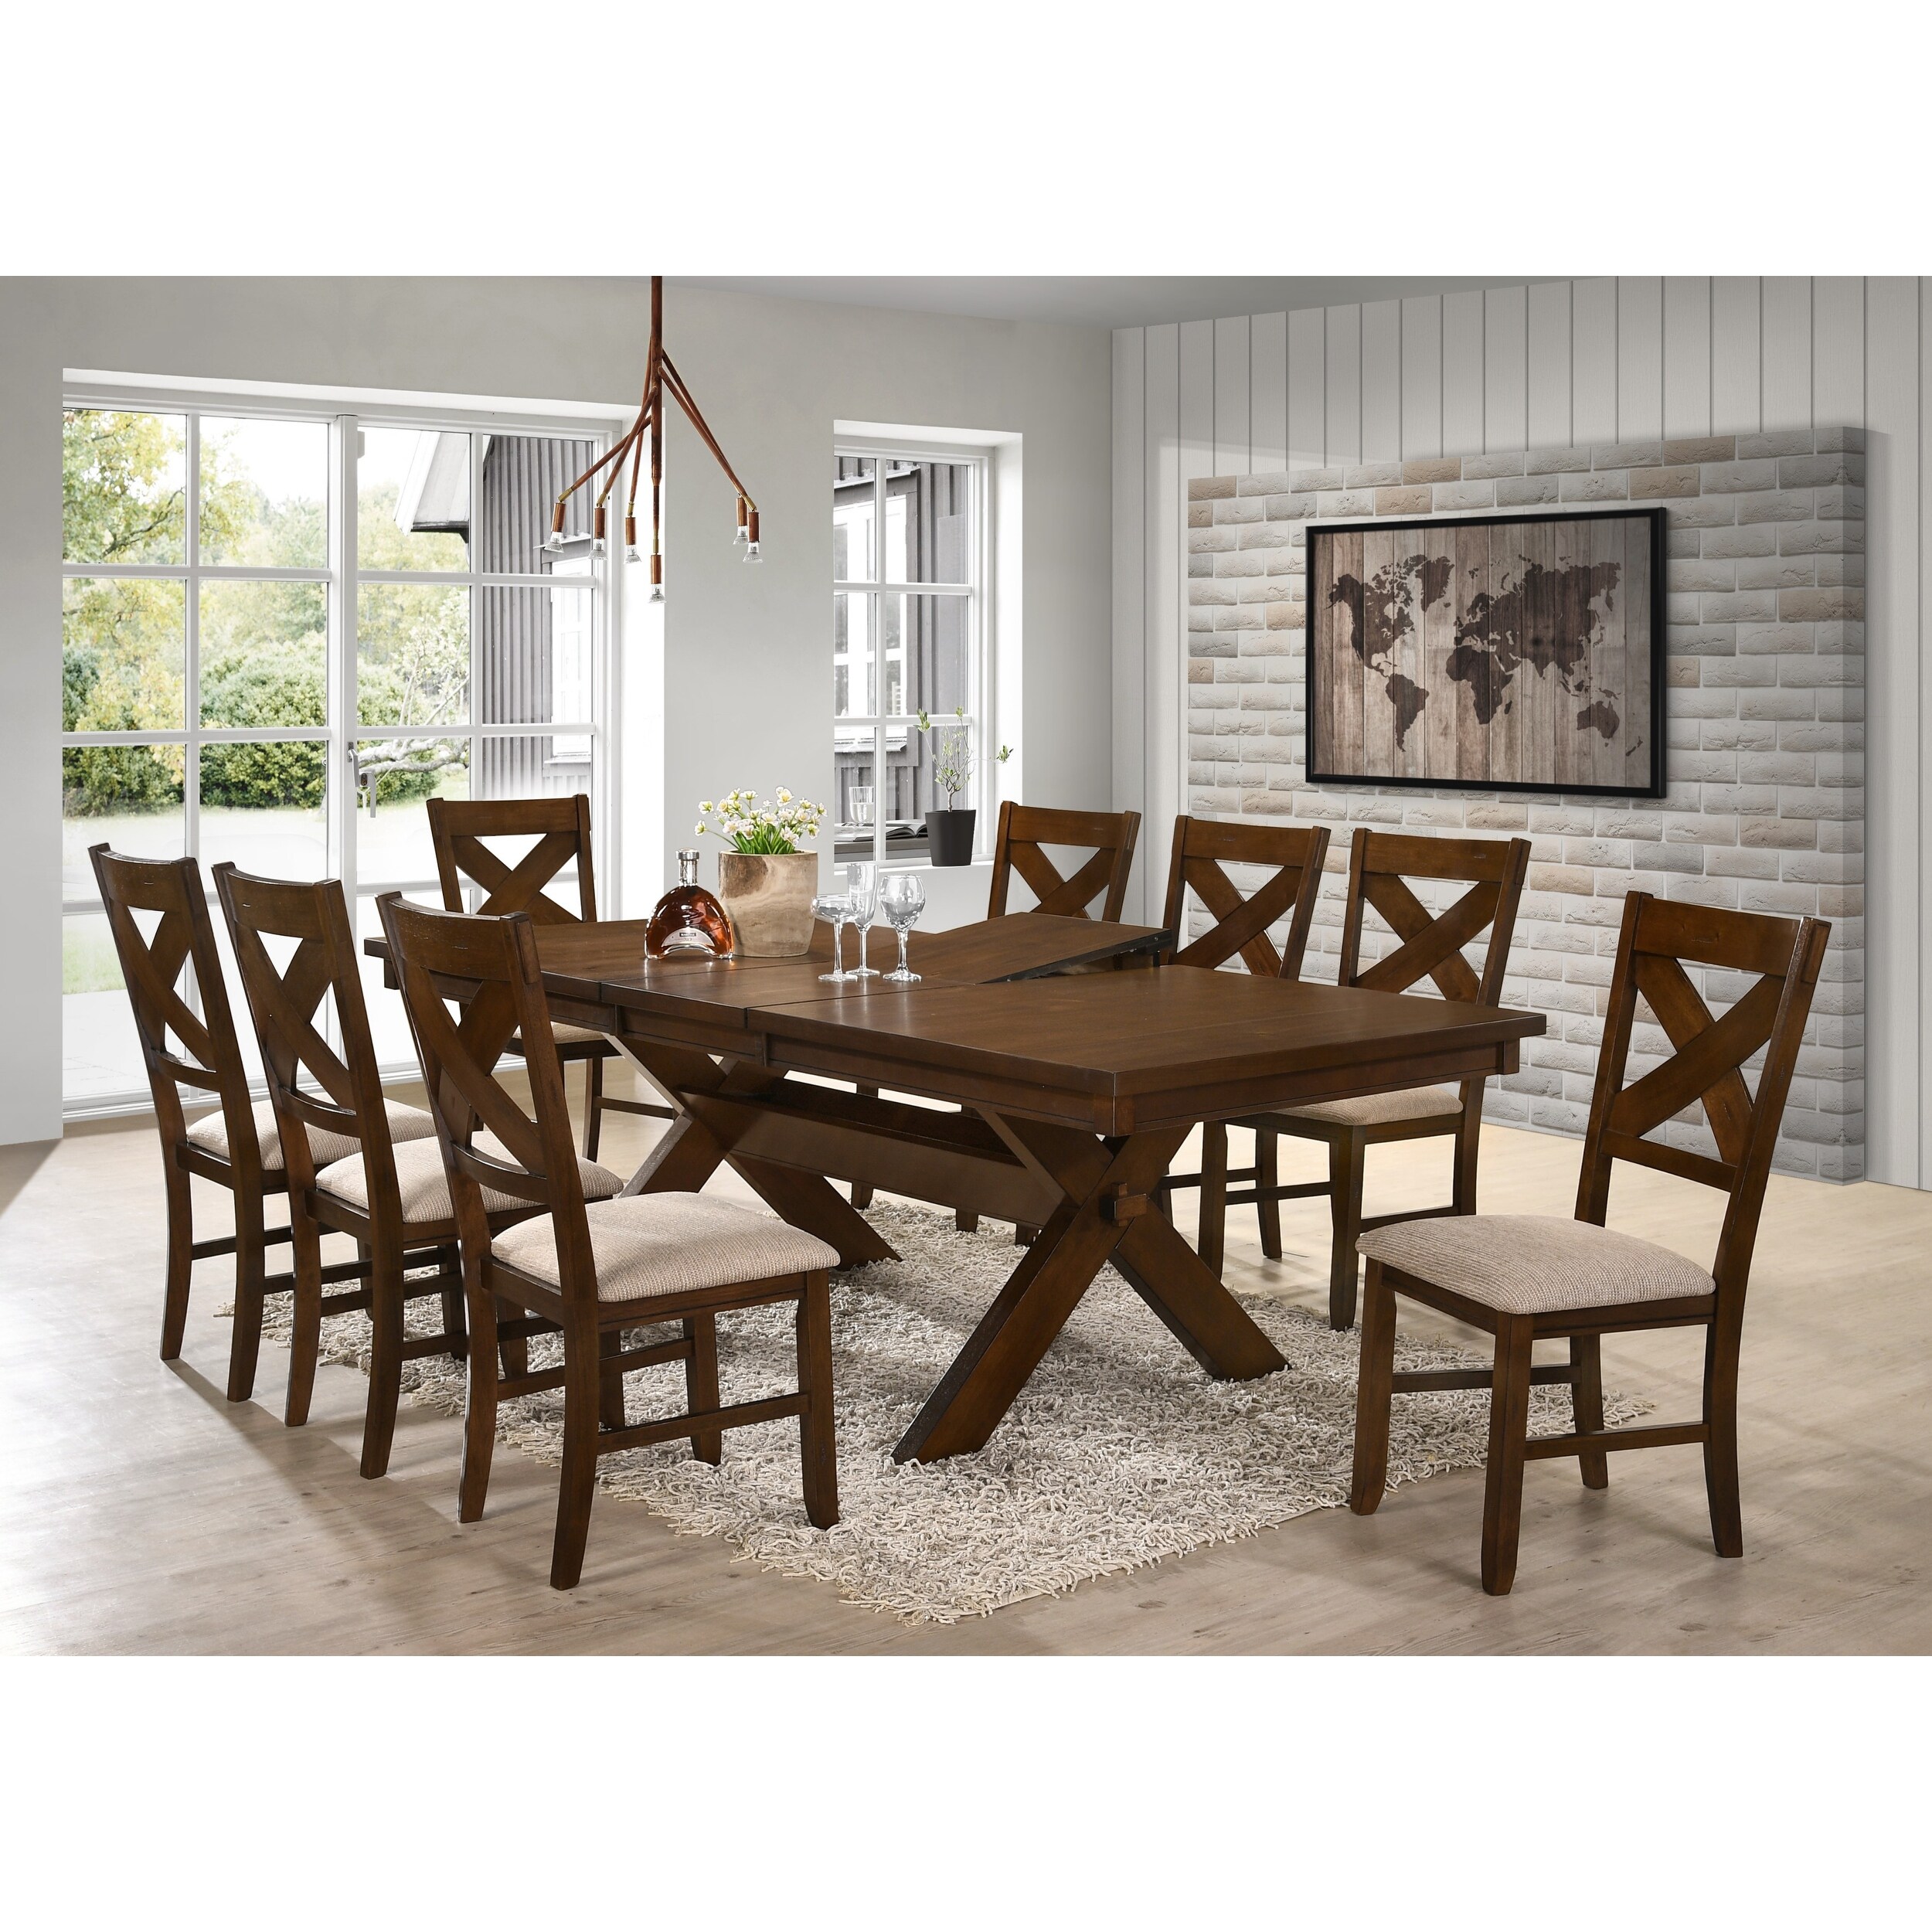 Laurel foundry modern farmhouse dining chairs